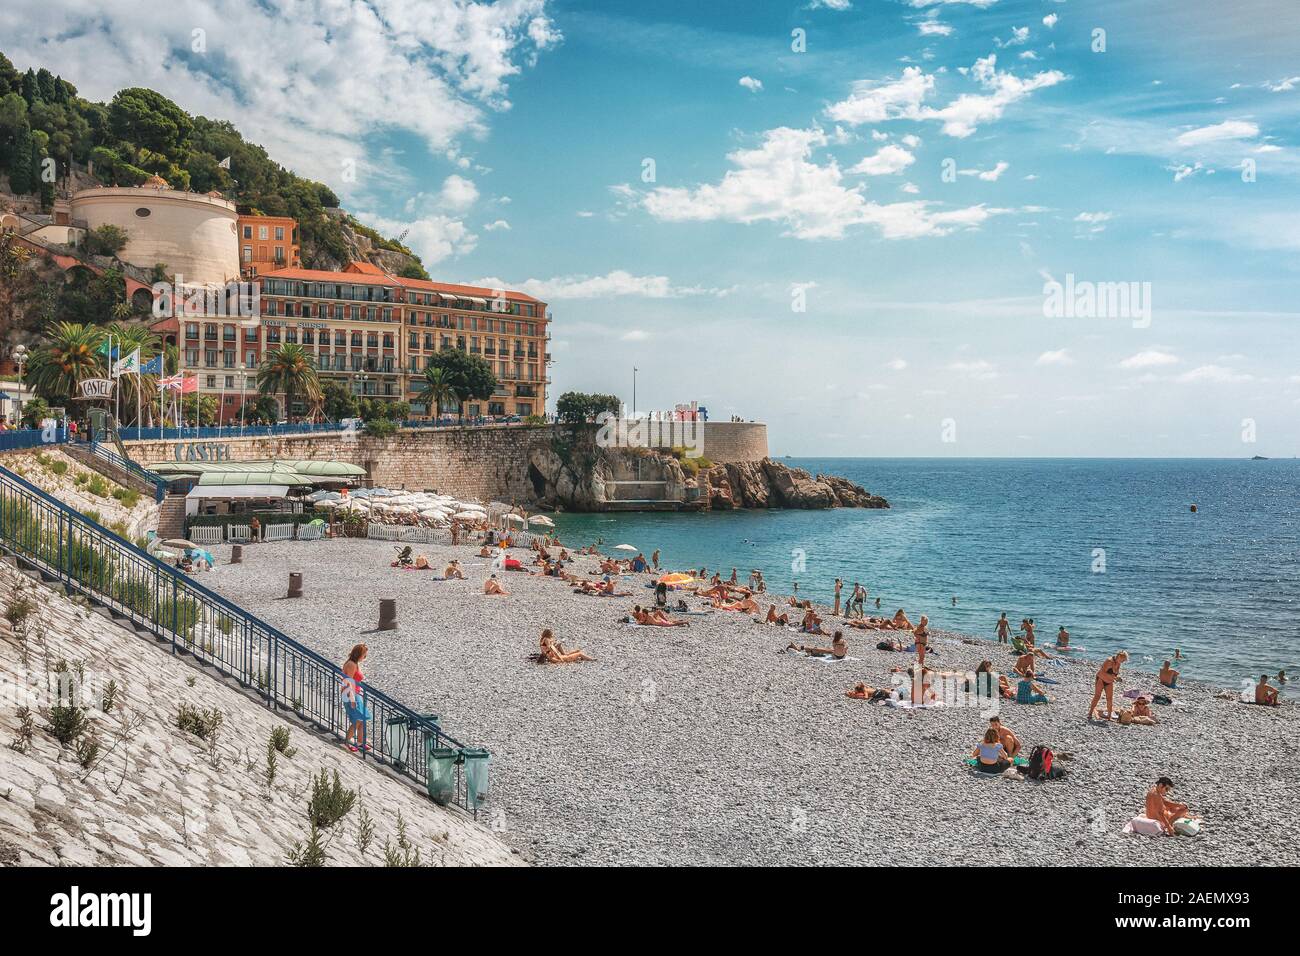 Nice, France, September 6, 2018: The public bath Plage de Castel with the Hotel Suisse in the background in the French city of Nice Stock Photo